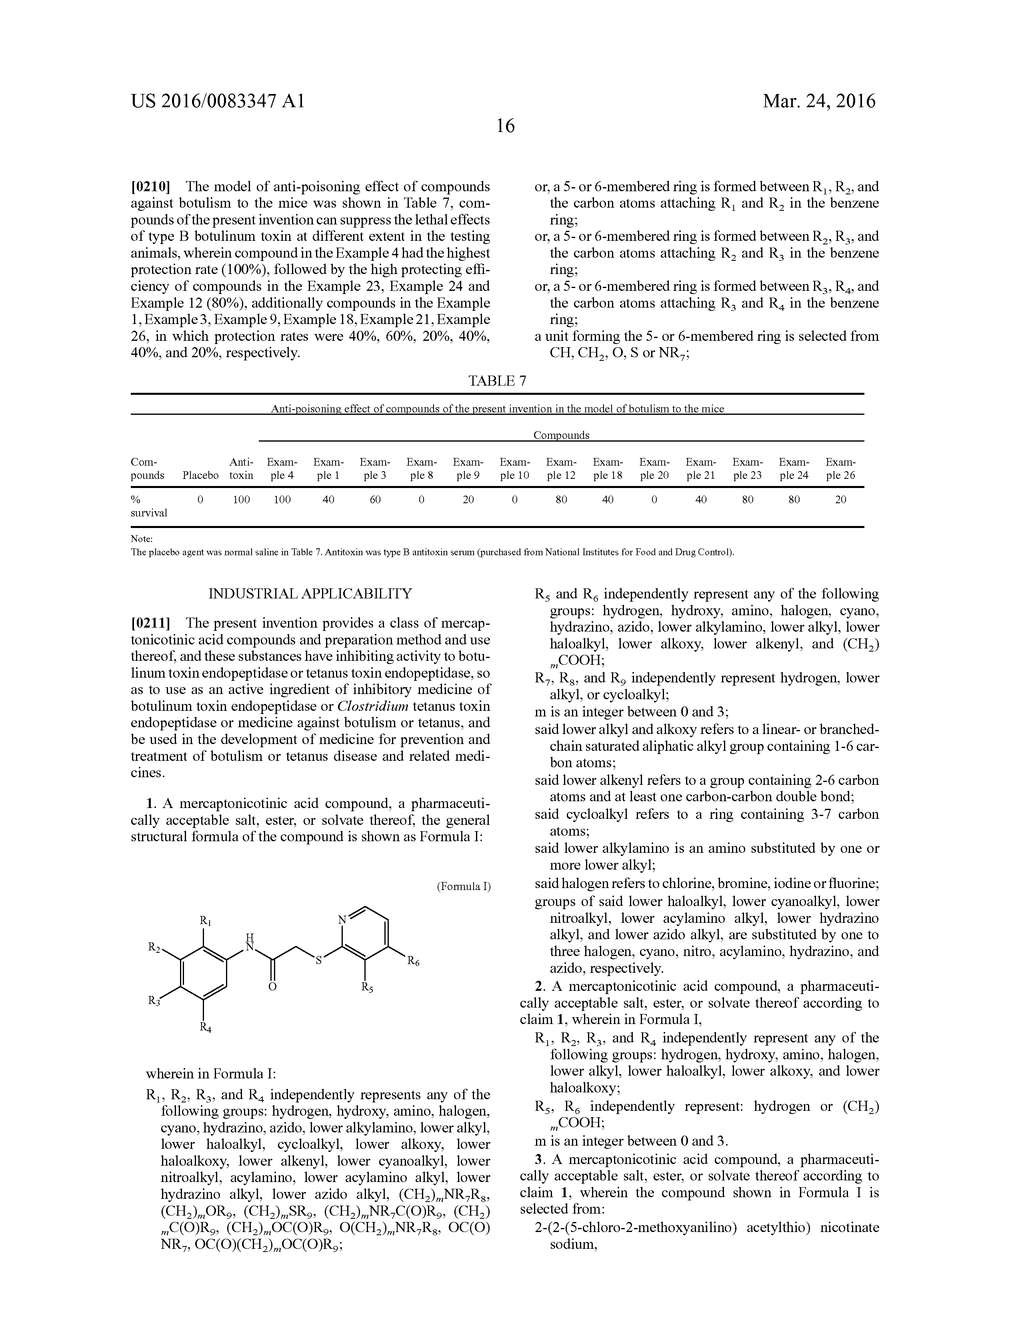 MERCAPTONICOTINIC ACID COMPOUND AND PREPARATION METHOD AND USE THEREOF - diagram, schematic, and image 17